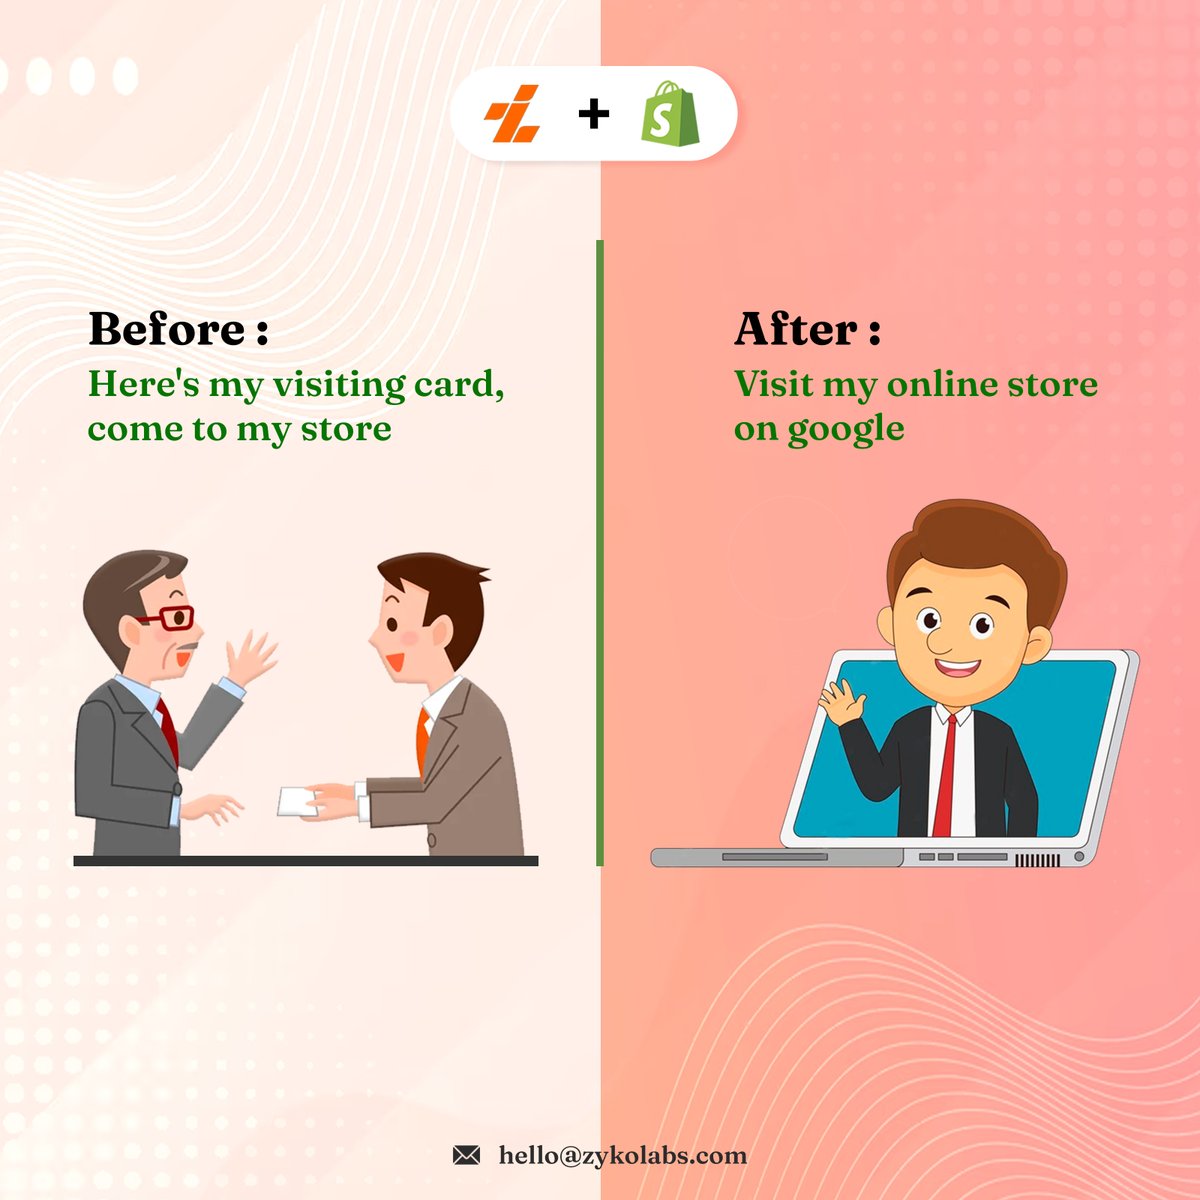 No more carrying around my visiting card - just visit my online store on Google!!
.
#shopify #ecommercestats #ecommerceindonesia #ecommercemoda #ecommerceappdesignanddevelopment #seo #marketing #onlinestore #website #ecommerceportal #ecommercejobs #onlineshopping #ecommerce